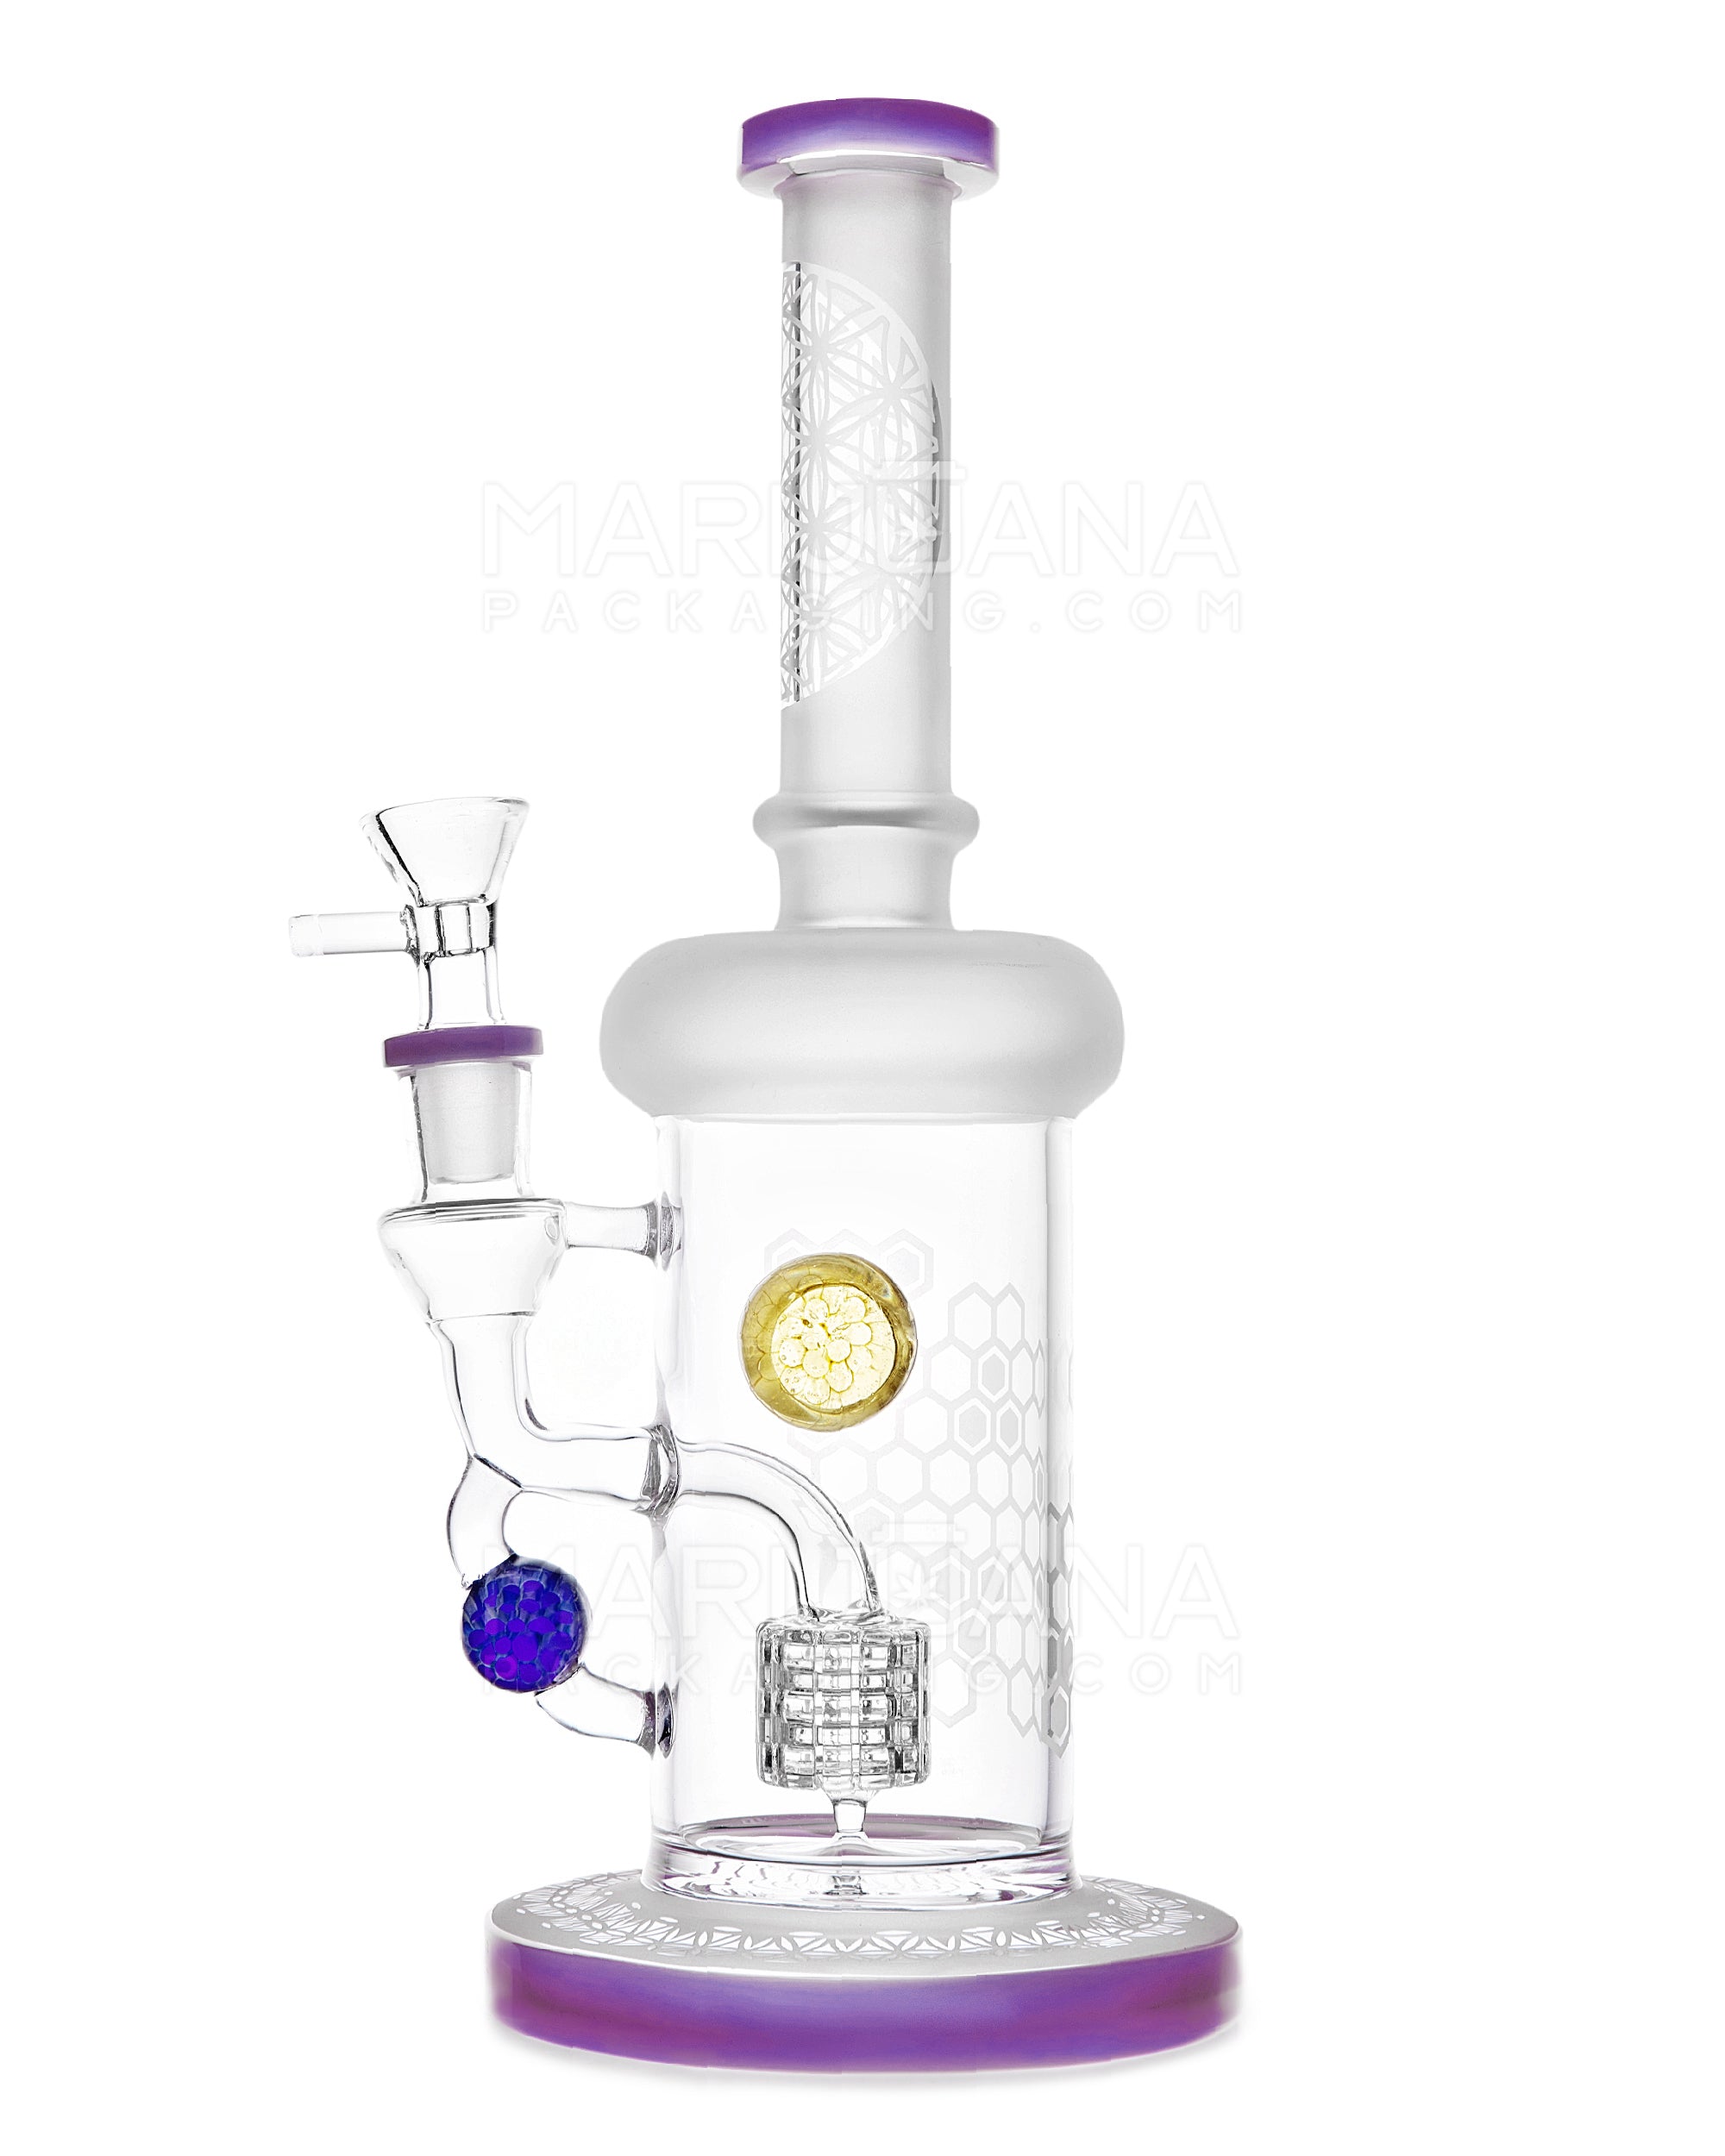 USA Glass | Straight Neck Matrix Perc Sandblasted Glass Water Pipe w/ Implosion Marbles | 11in Tall - 14mm Bowl - Purple - 1